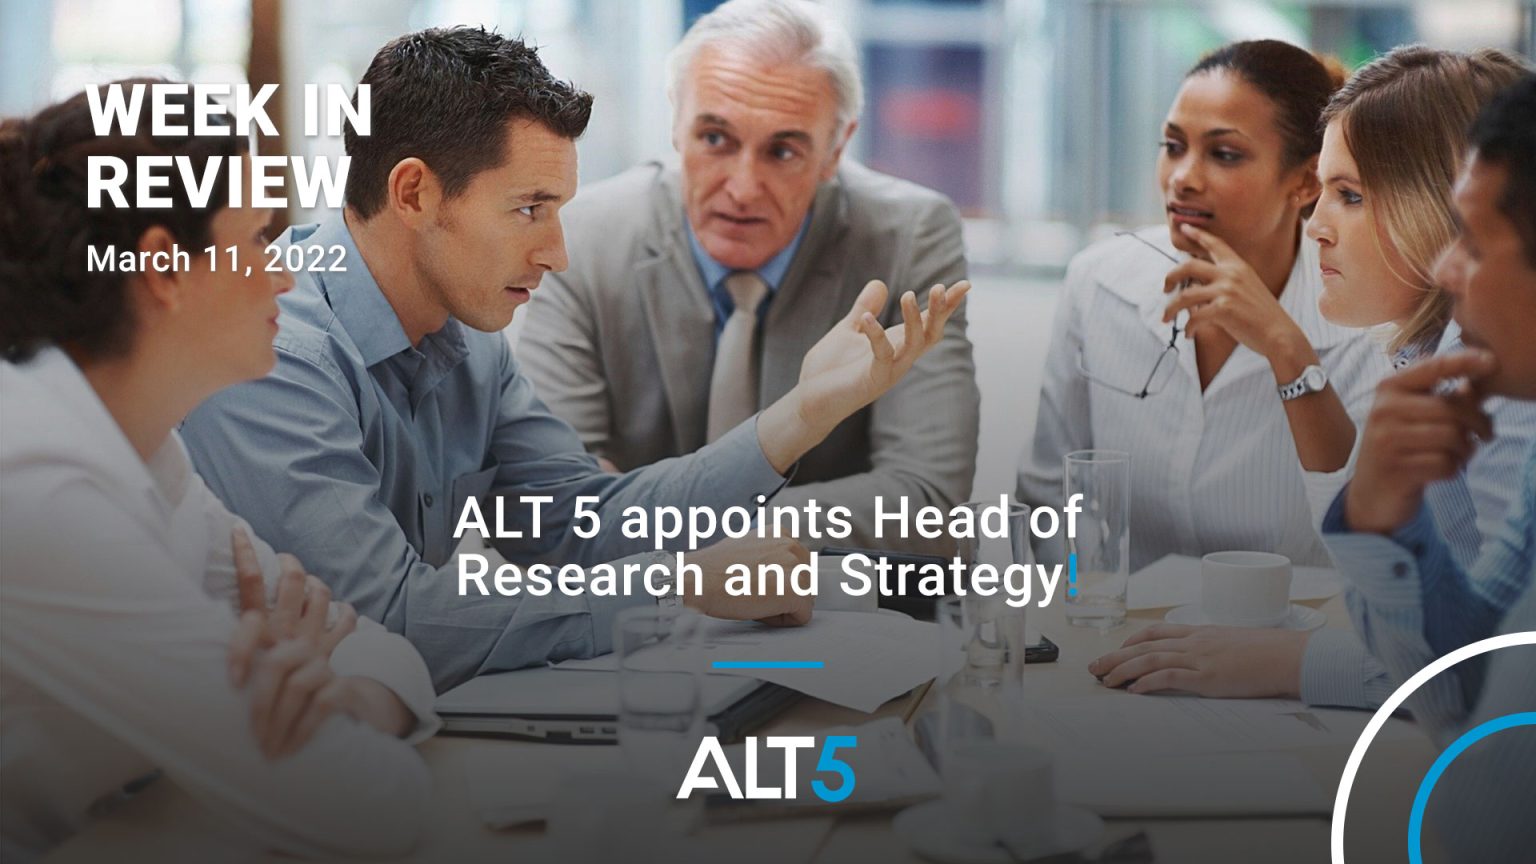 Week in review: March 11, 2022 - ALT appoints head of research and strategy